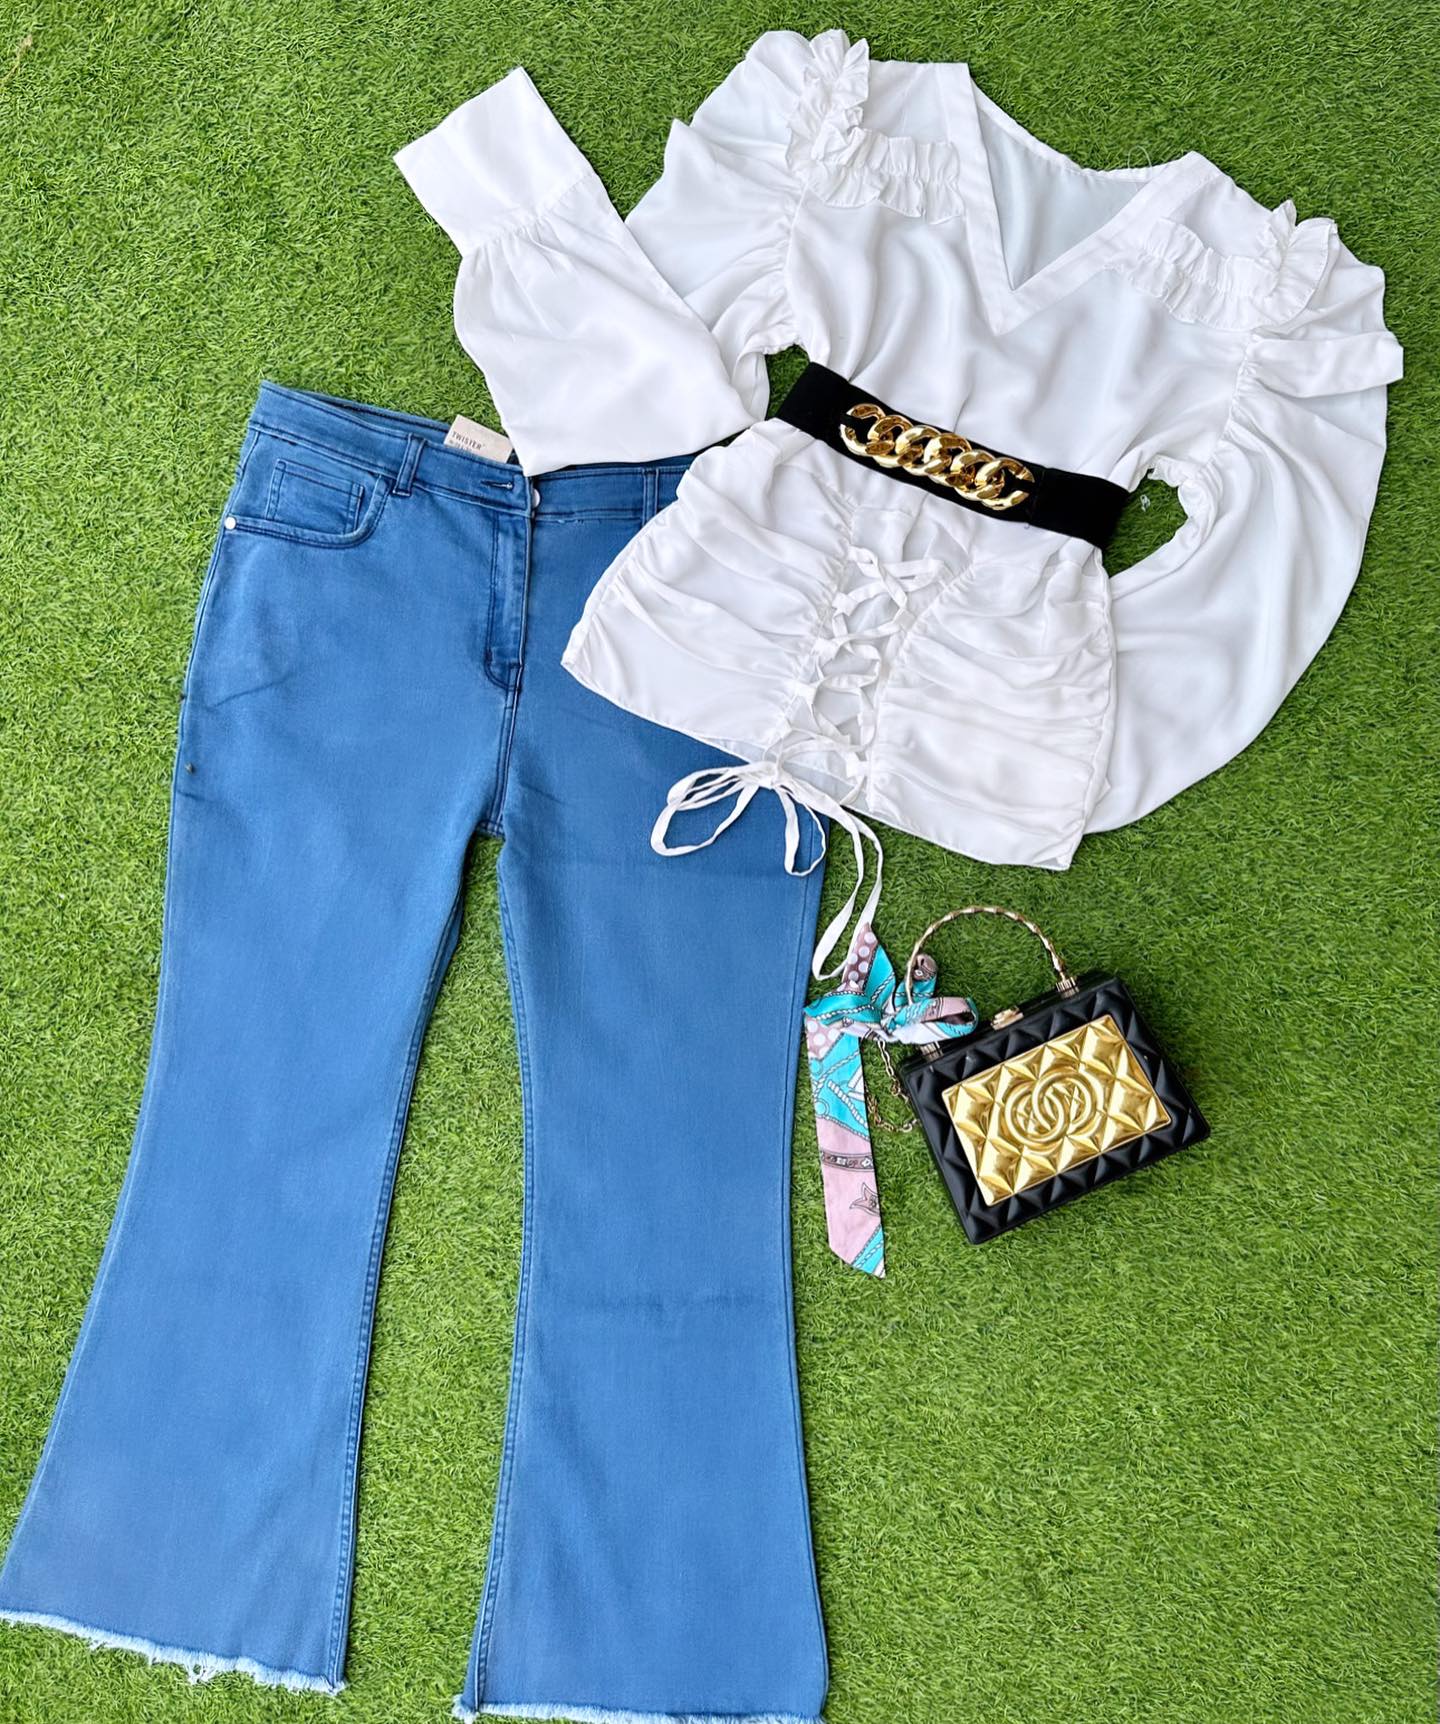 Chic Dory & Frill Shirt with Bell Bottom Jeans Ensemble